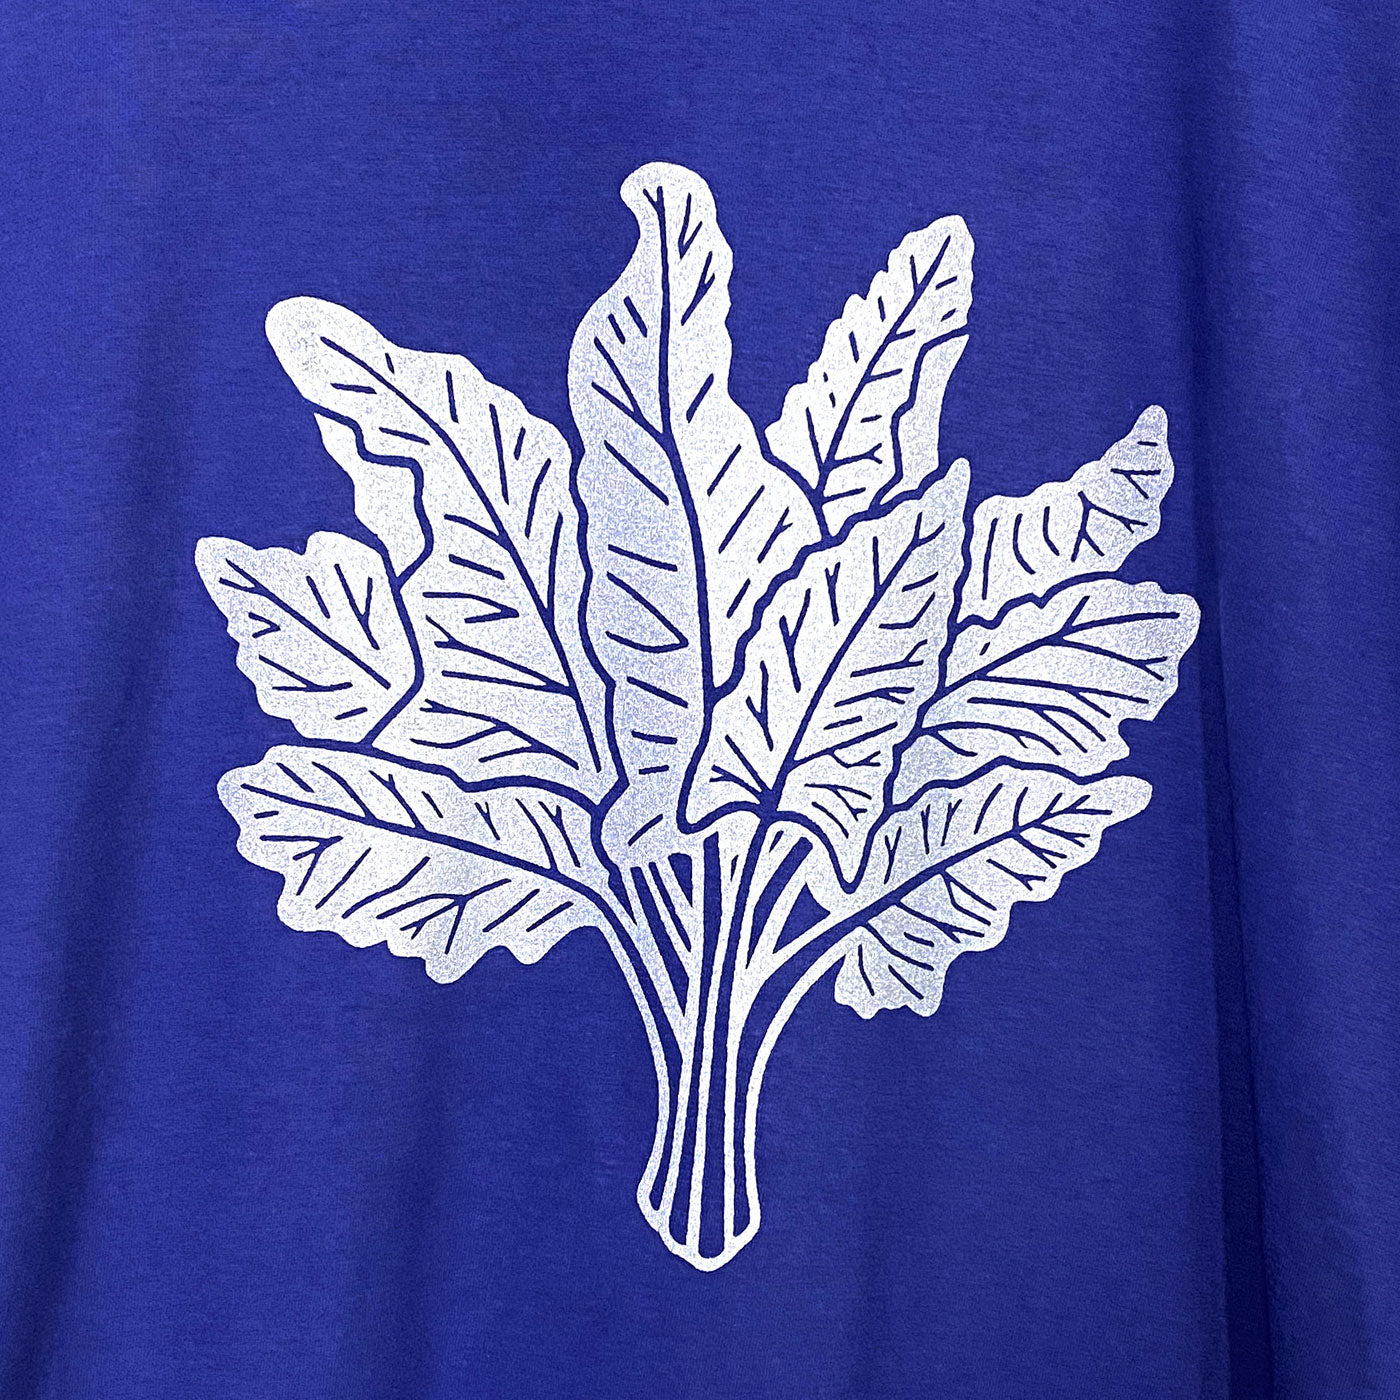 Detail of a silver swiss chard illustration silkscreened on a bright blue tee